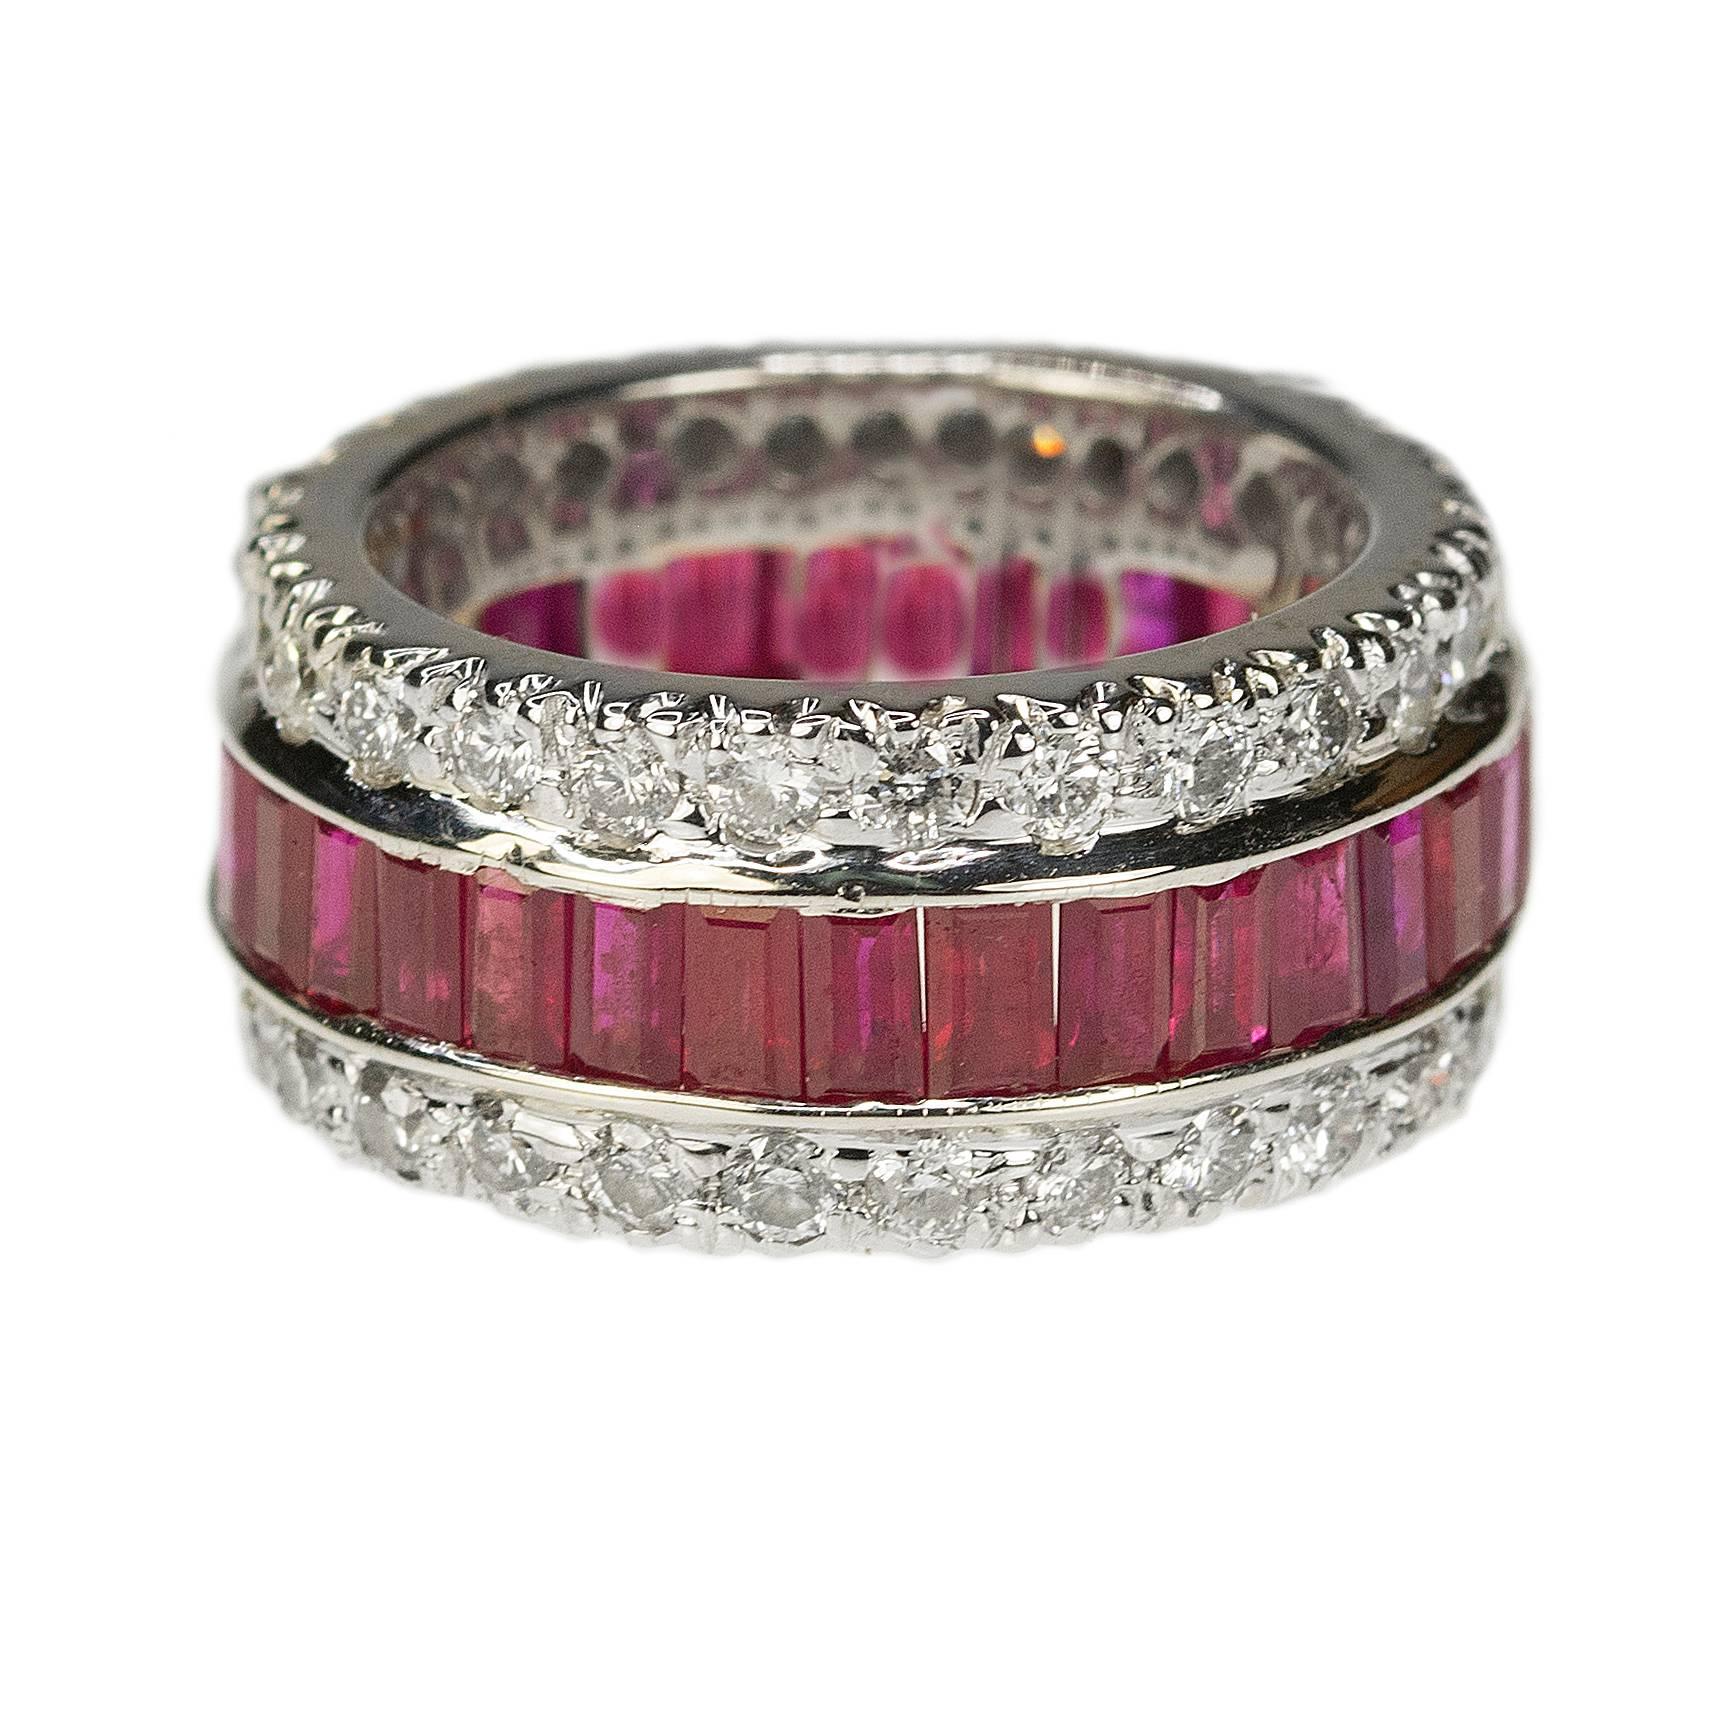 18k white gold Ruby & Diamond Eternity Band with 33 emerald cut rubies weighing approximately 4.25 carats and 54 modern round brilliant diamonds weighing approximately 2.16 carats, 11.58g